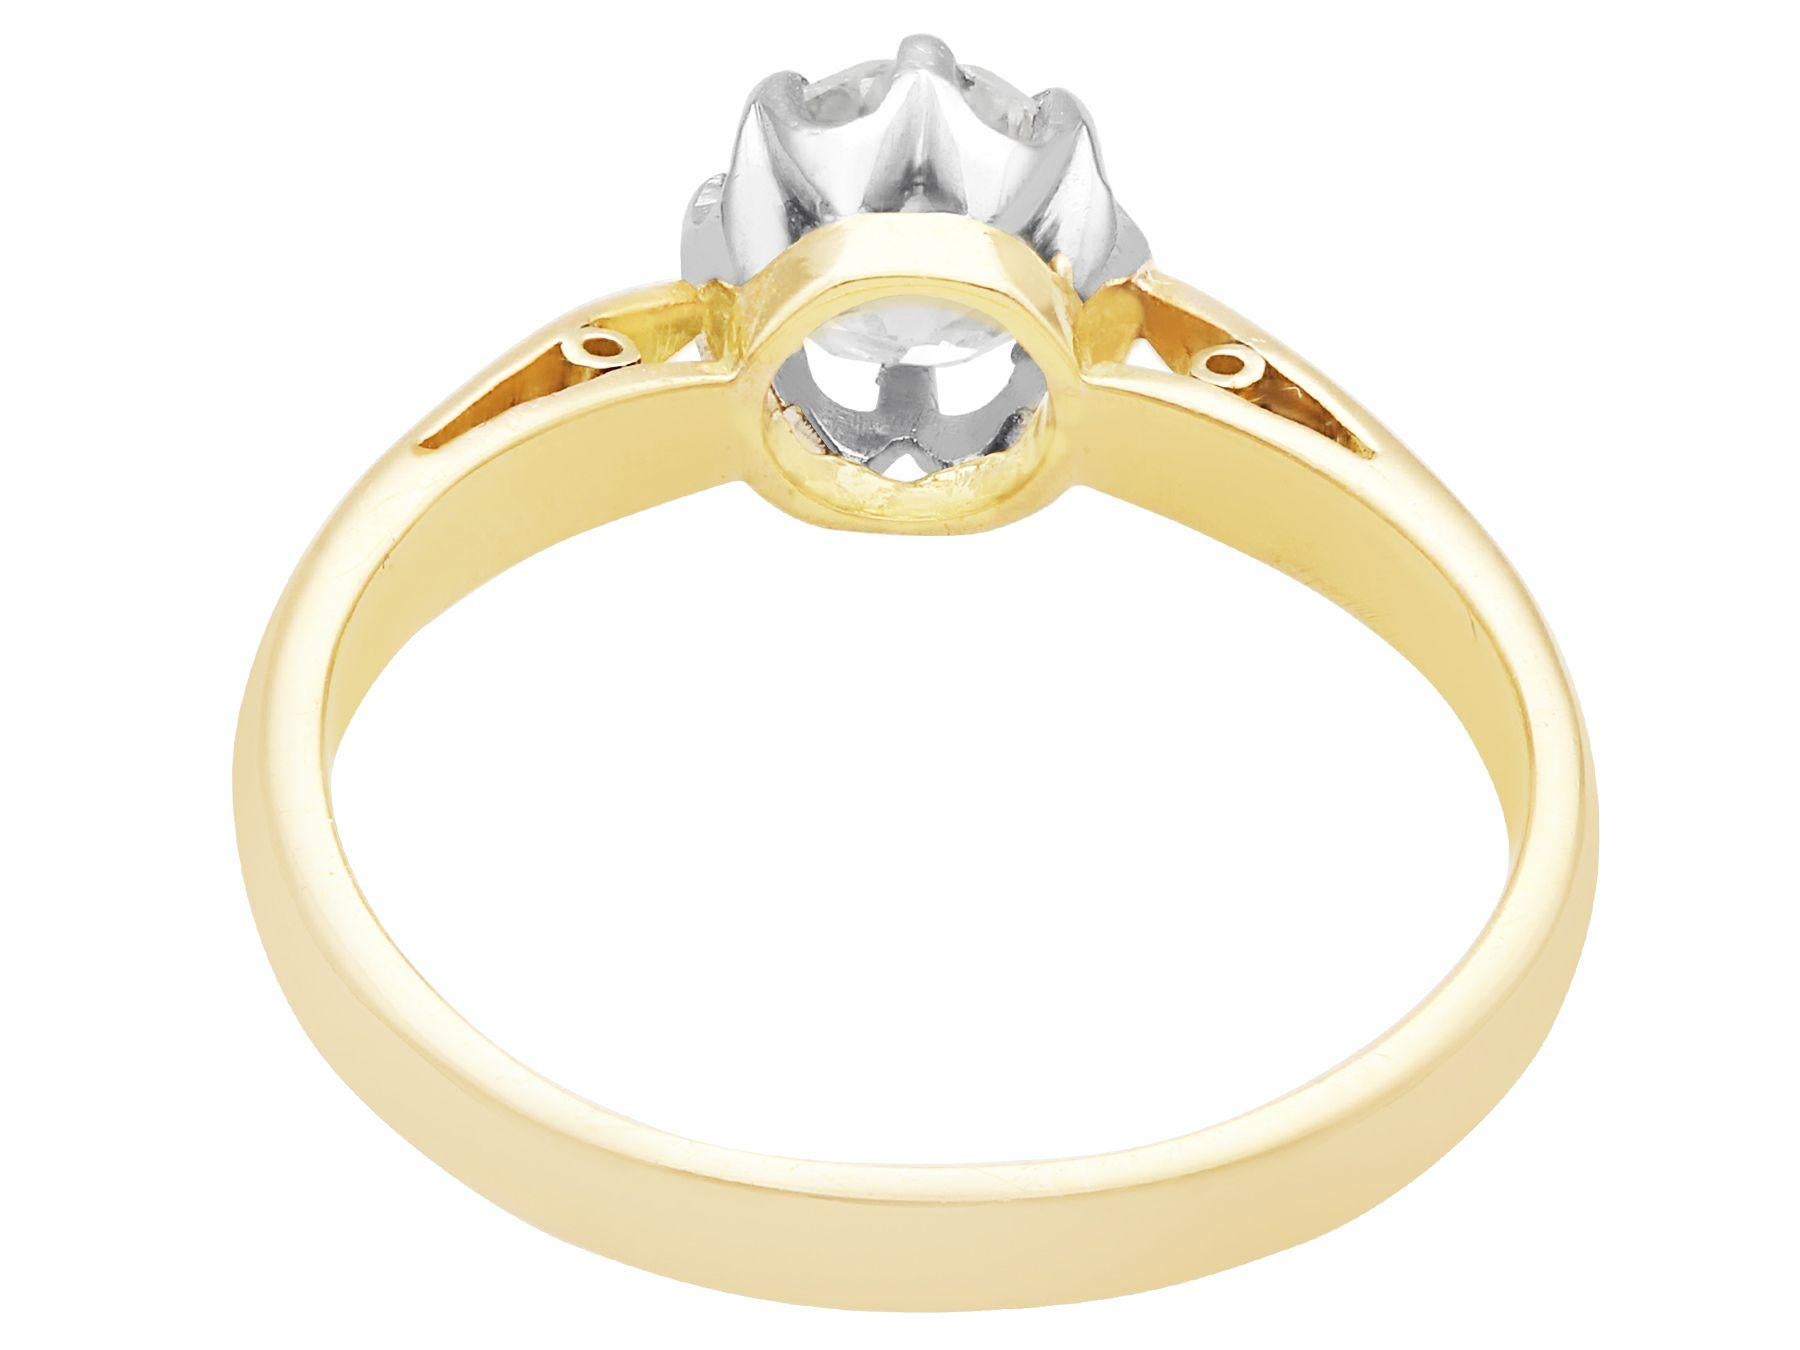 Antique Diamond and Yellow Gold Solitaire Ring Circa 1920 In Excellent Condition For Sale In Jesmond, Newcastle Upon Tyne